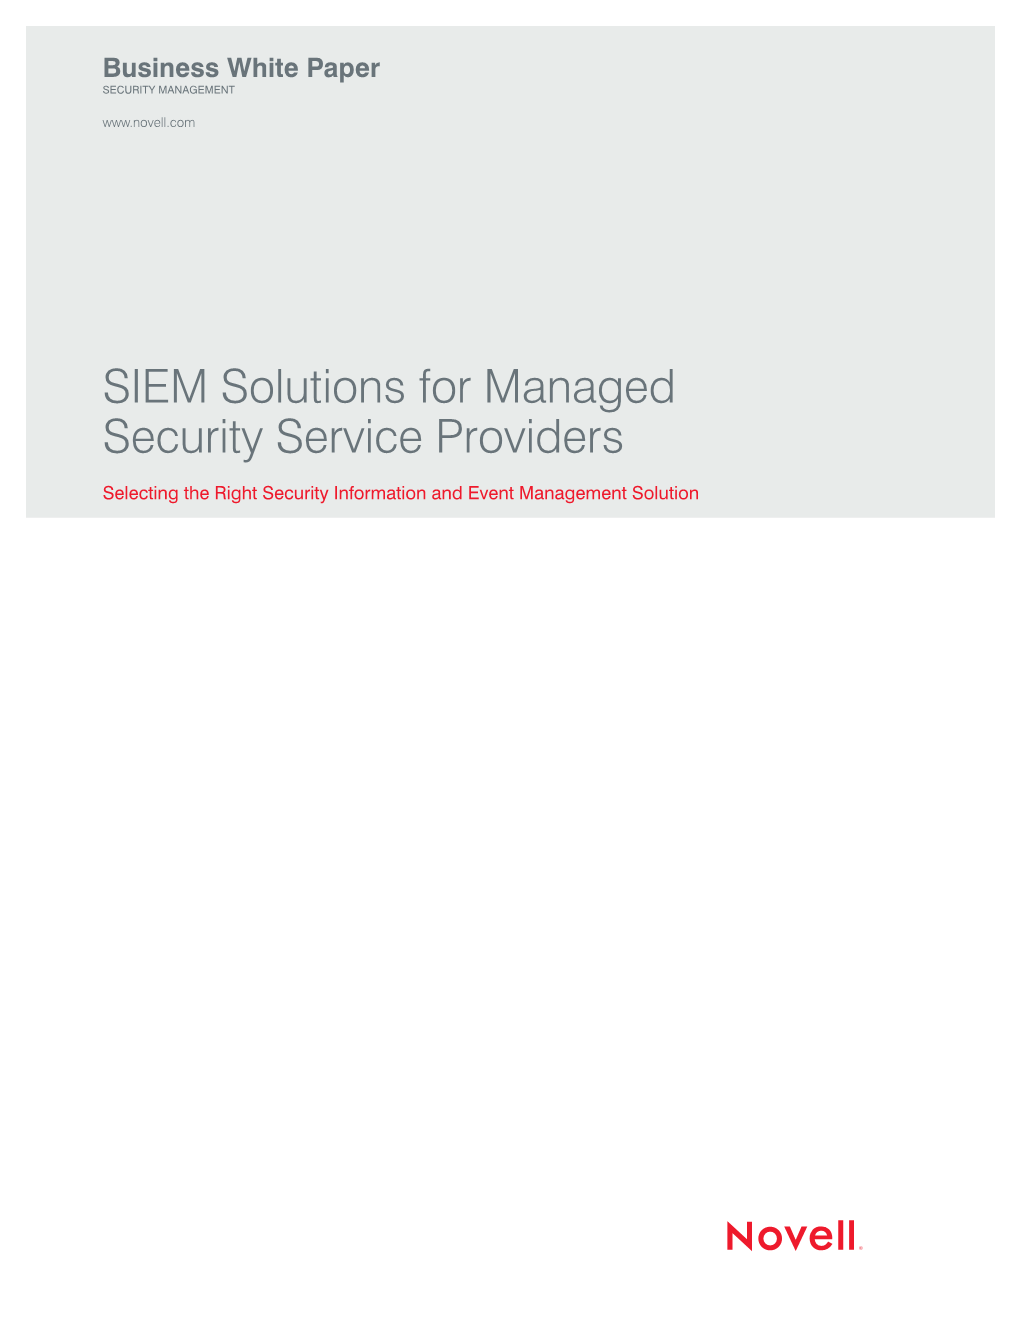 SIEM Solutions for Managed Security Service Providers